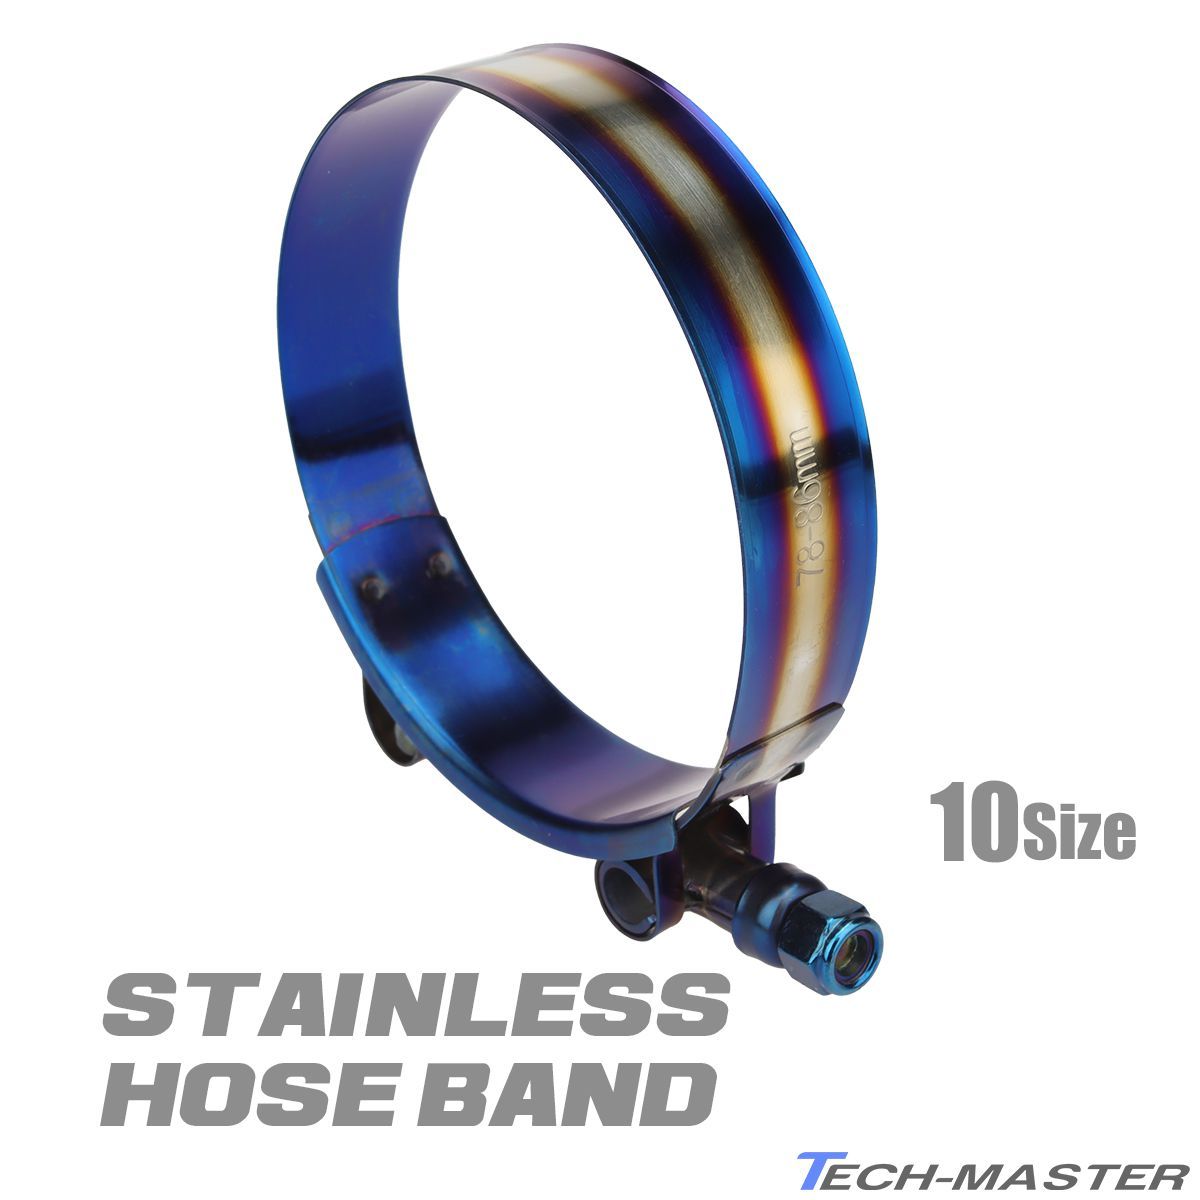  insulator band made of stainless steel roasting titanium color 